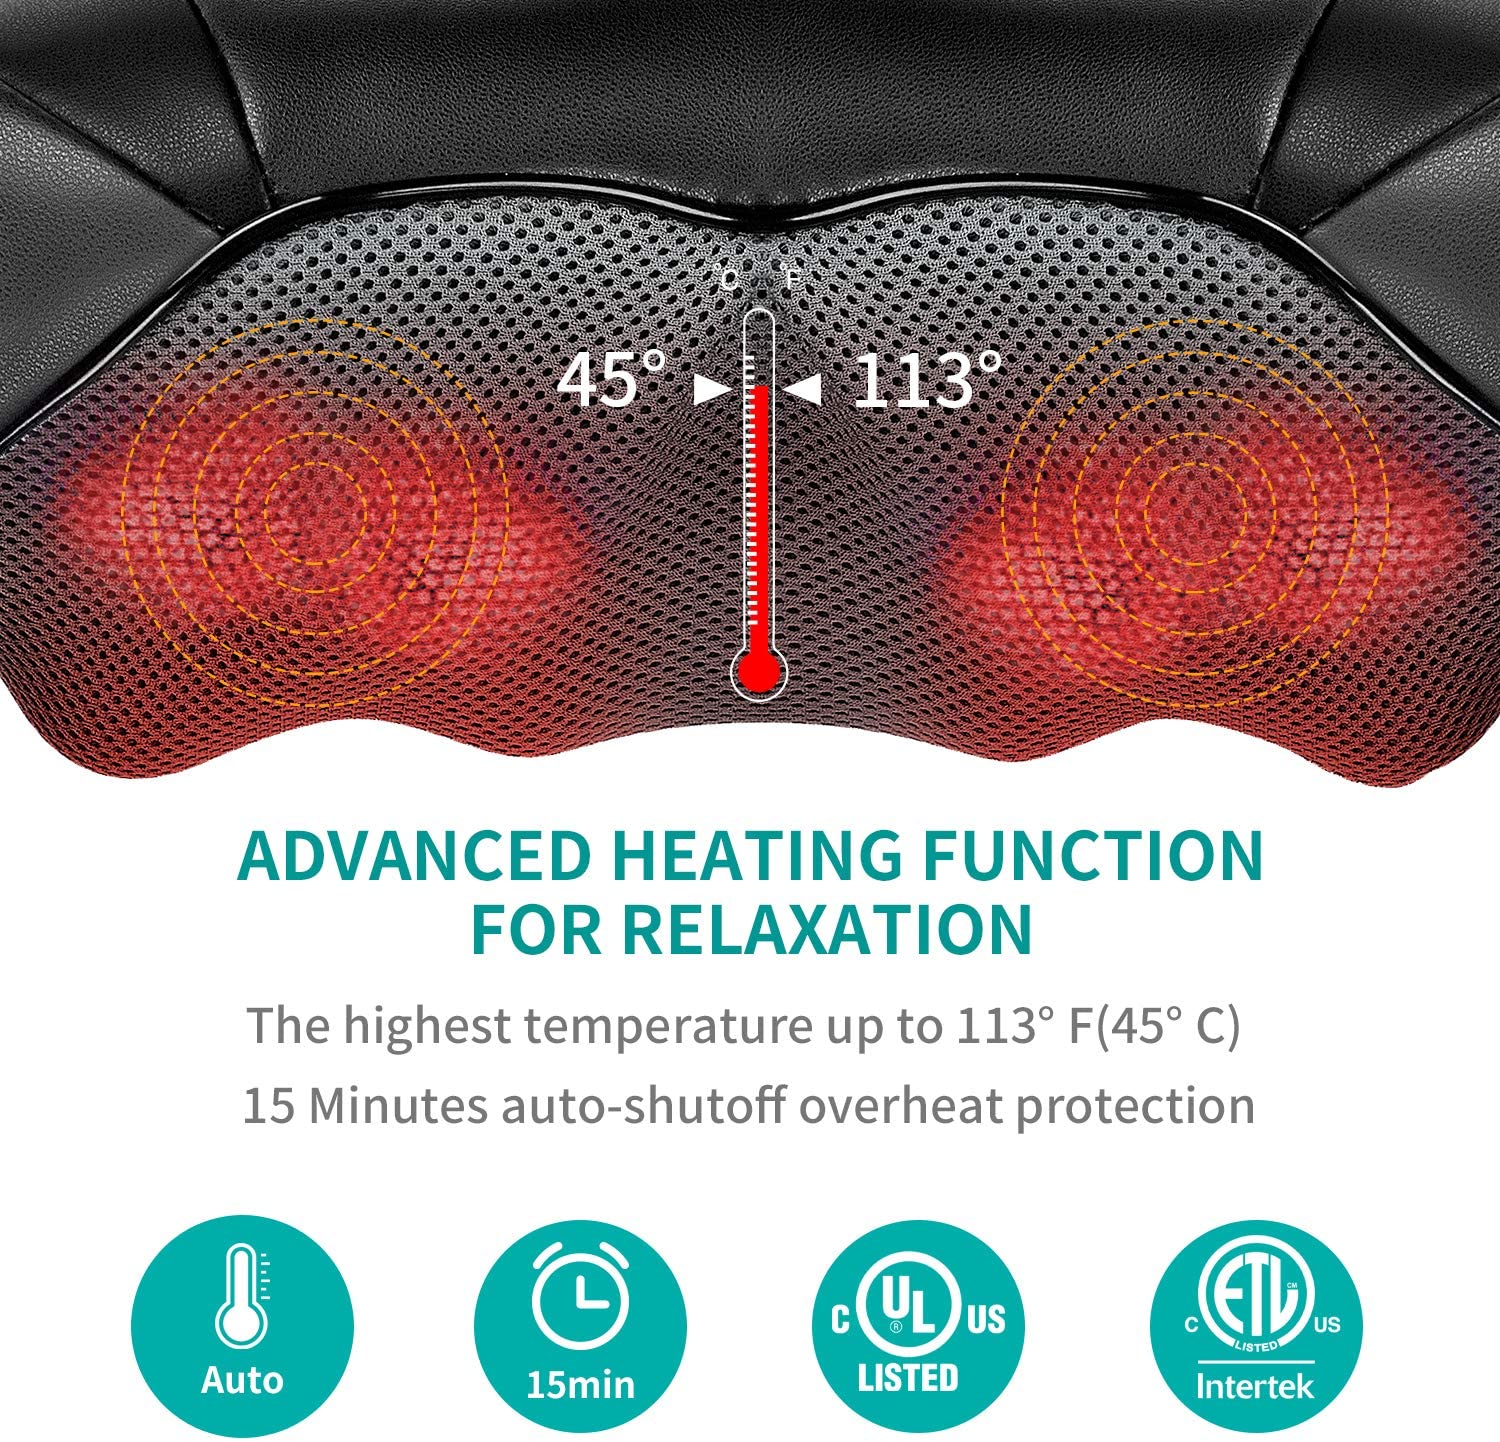 Nekteck Shiatsu Neck and Back Massager with Soothing Heat, Electric Deep Tissue 3D Kneading Massage Pillow for Shoulder, Leg, Full Body Muscle Pain Relief, Car, Office and Home Use Blue - image 4 of 9